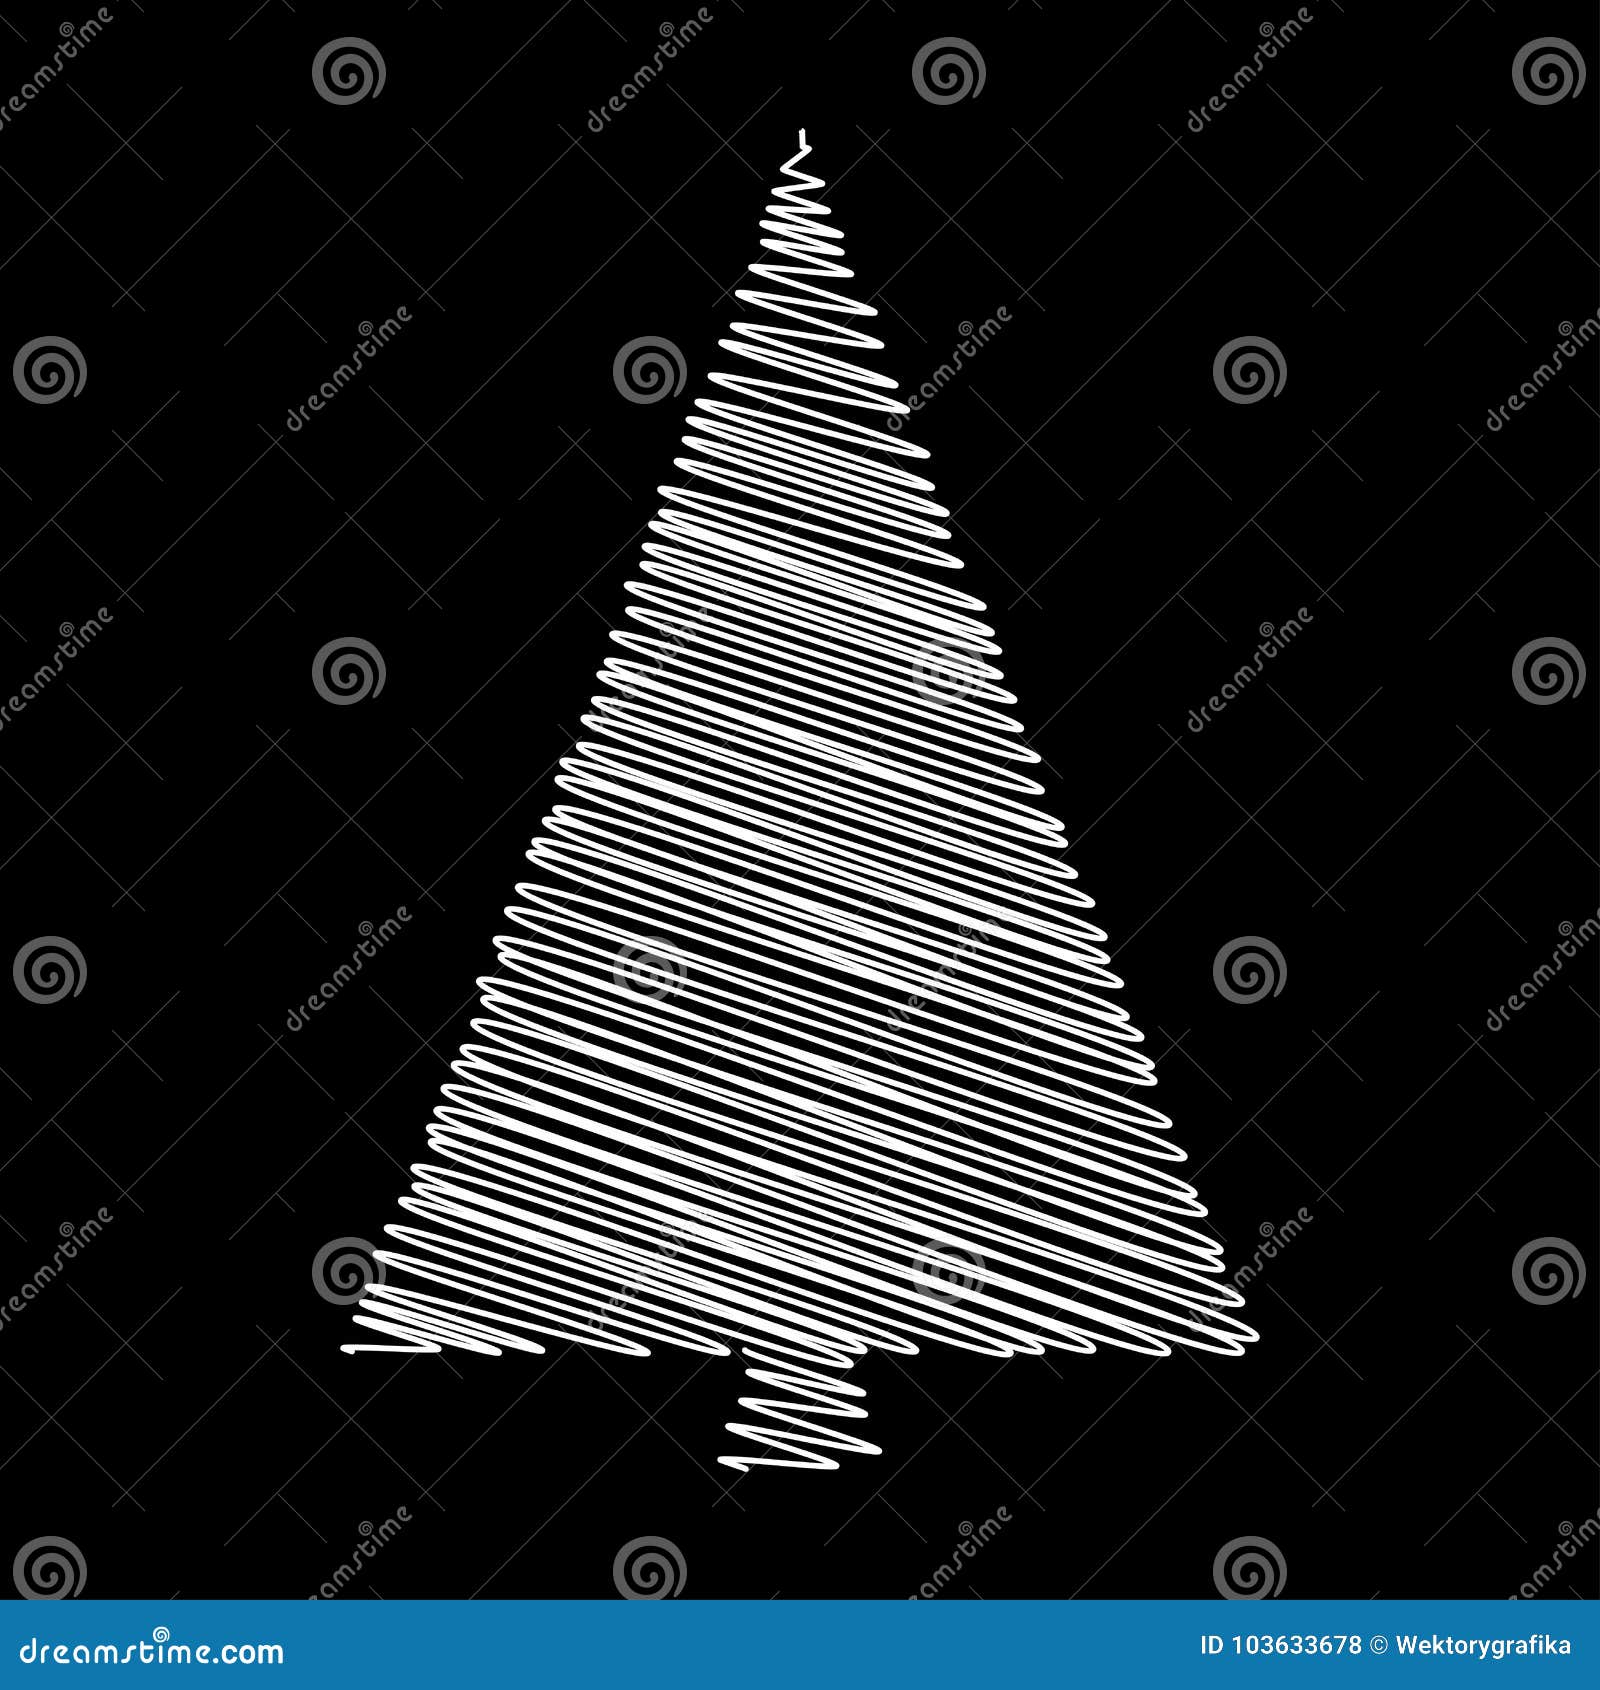 Christmas Tree Scribble Vectordesign Isolated on Black Background Stock ...